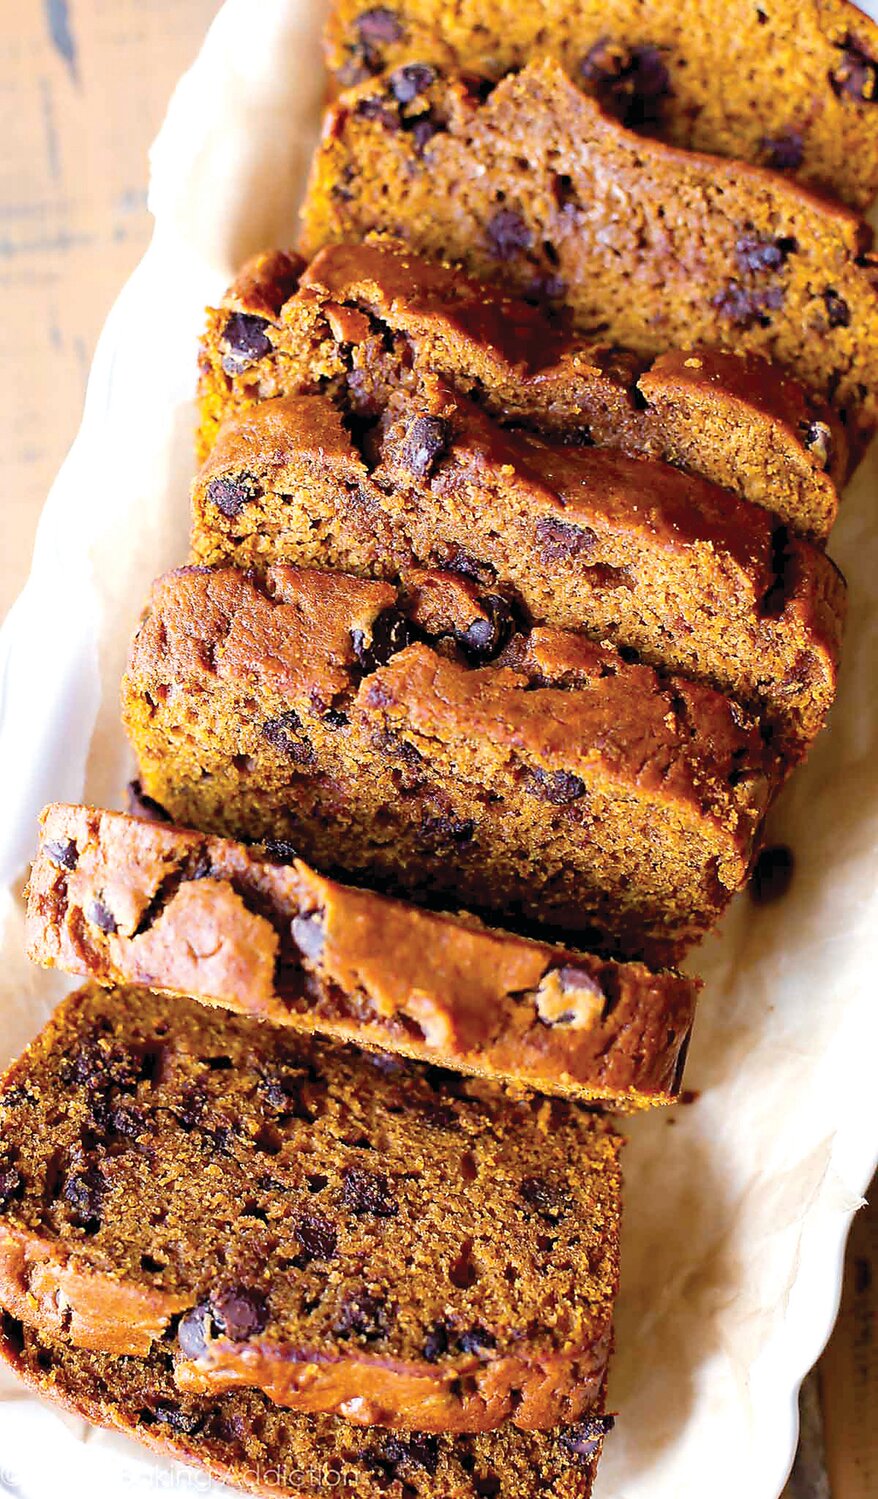 Chocolate chips and orange juice add zip to this recipe for pumpkin bread, one way to use one of America’s favorite vegetables.